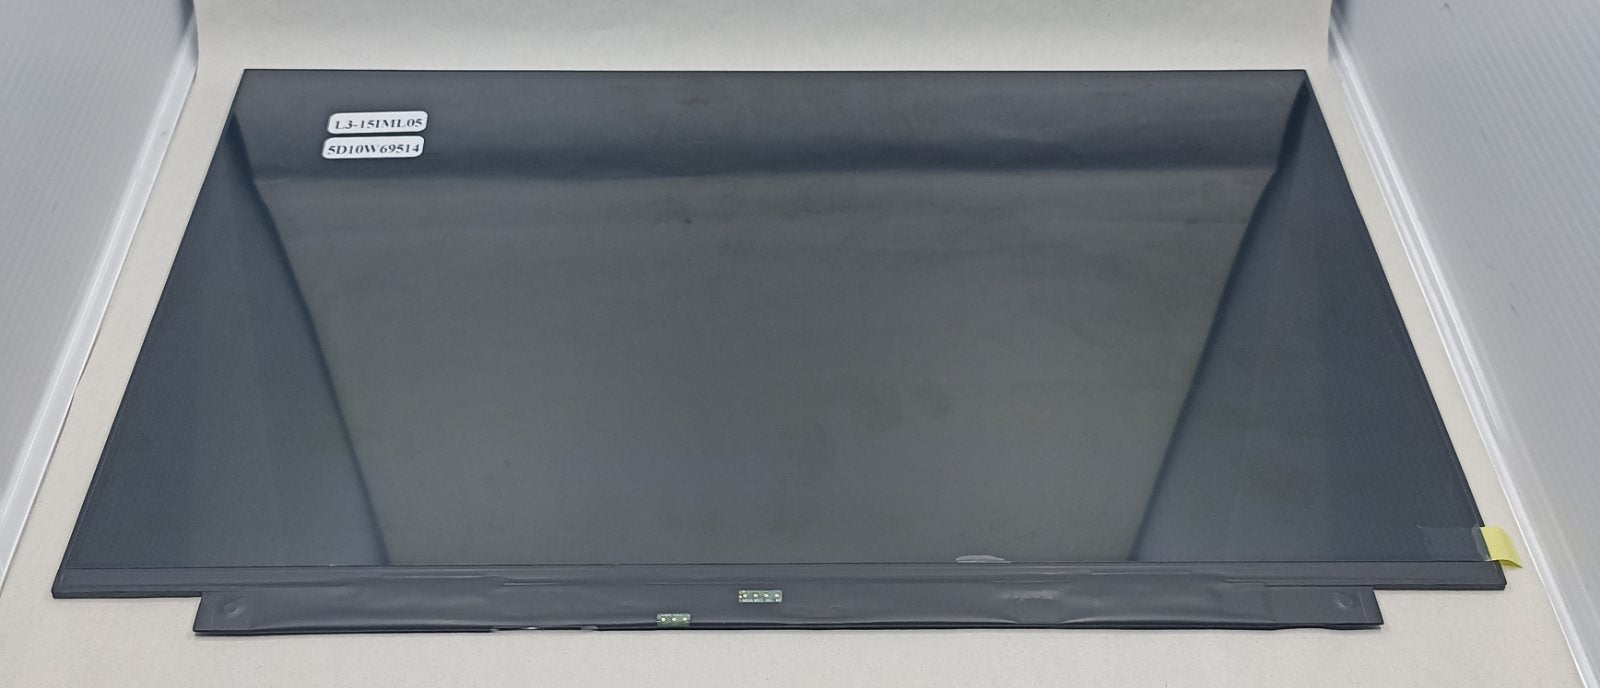 Replacement LCD for Lenovo L3-15IML05 WL